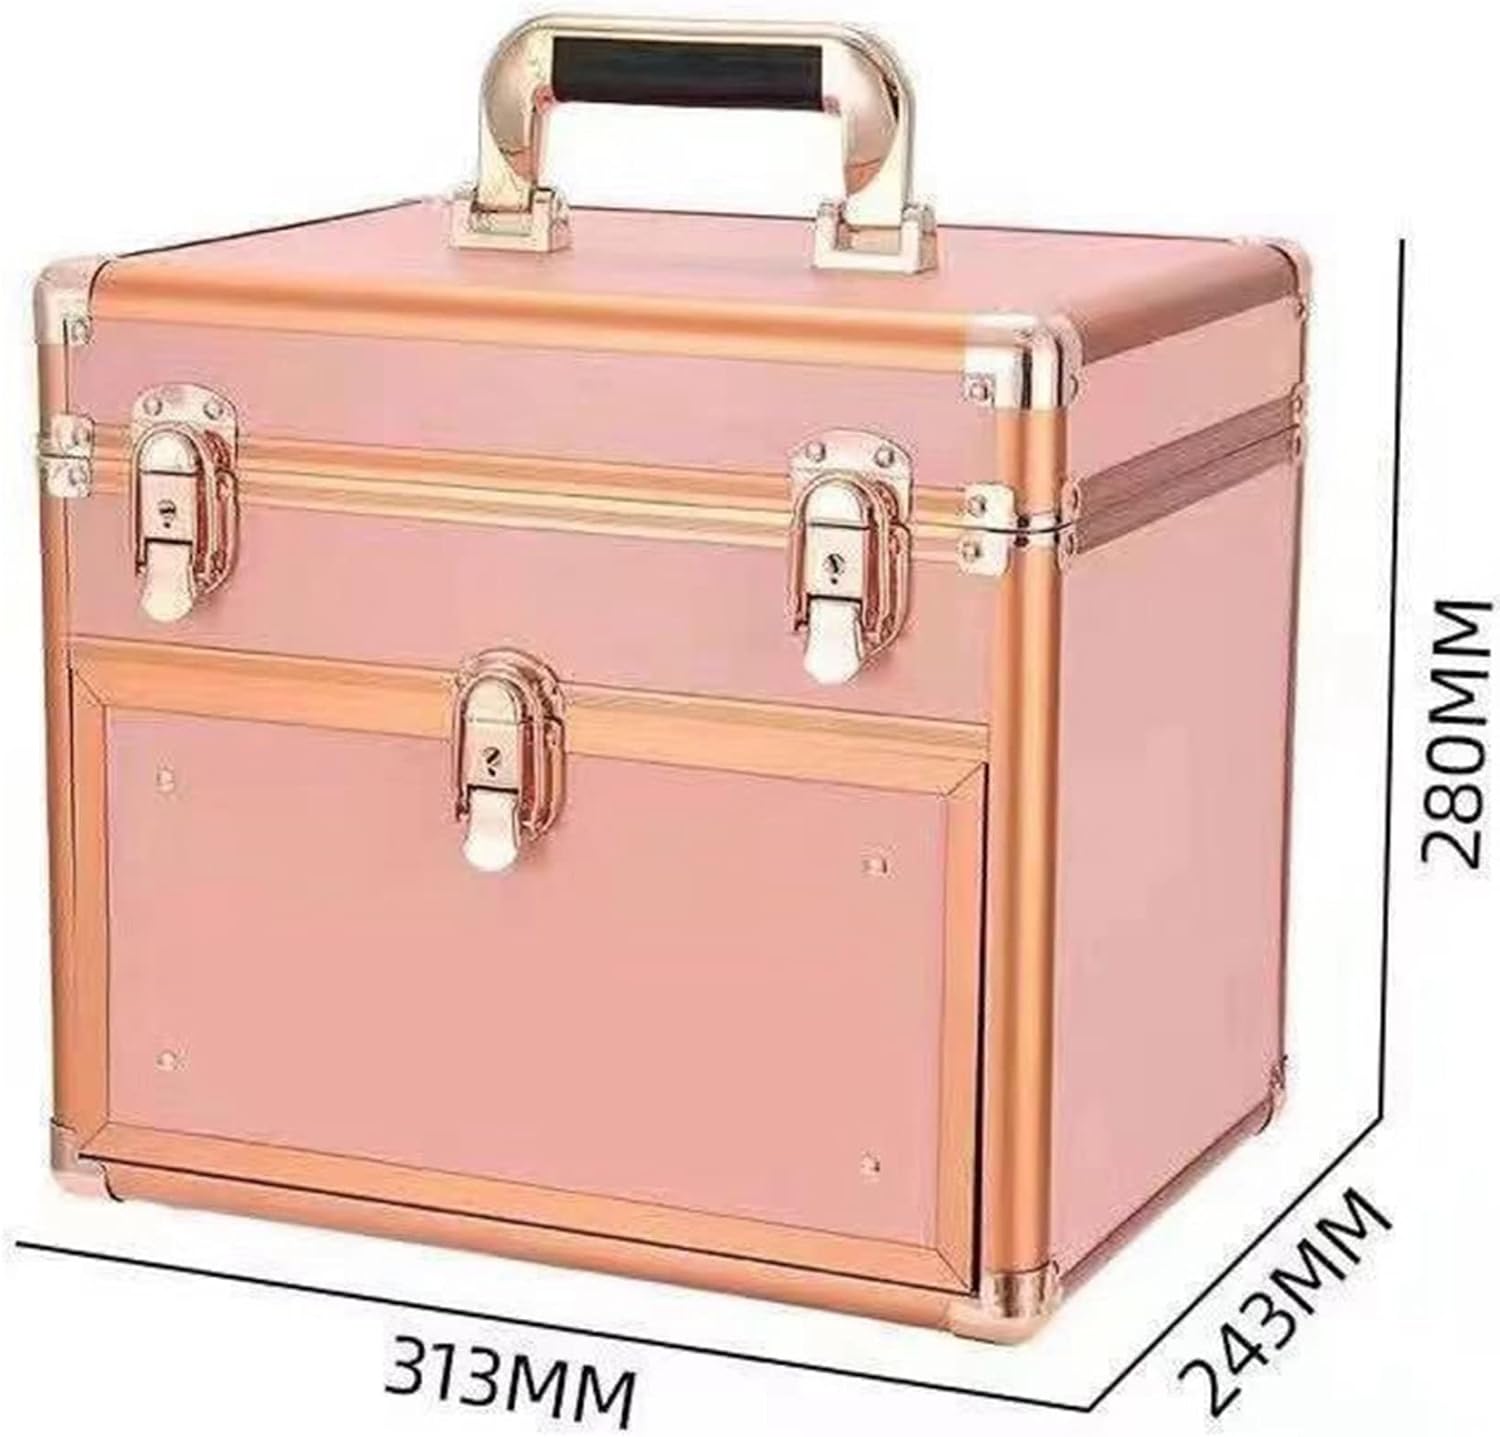 Portable Travel Cosmetic Case